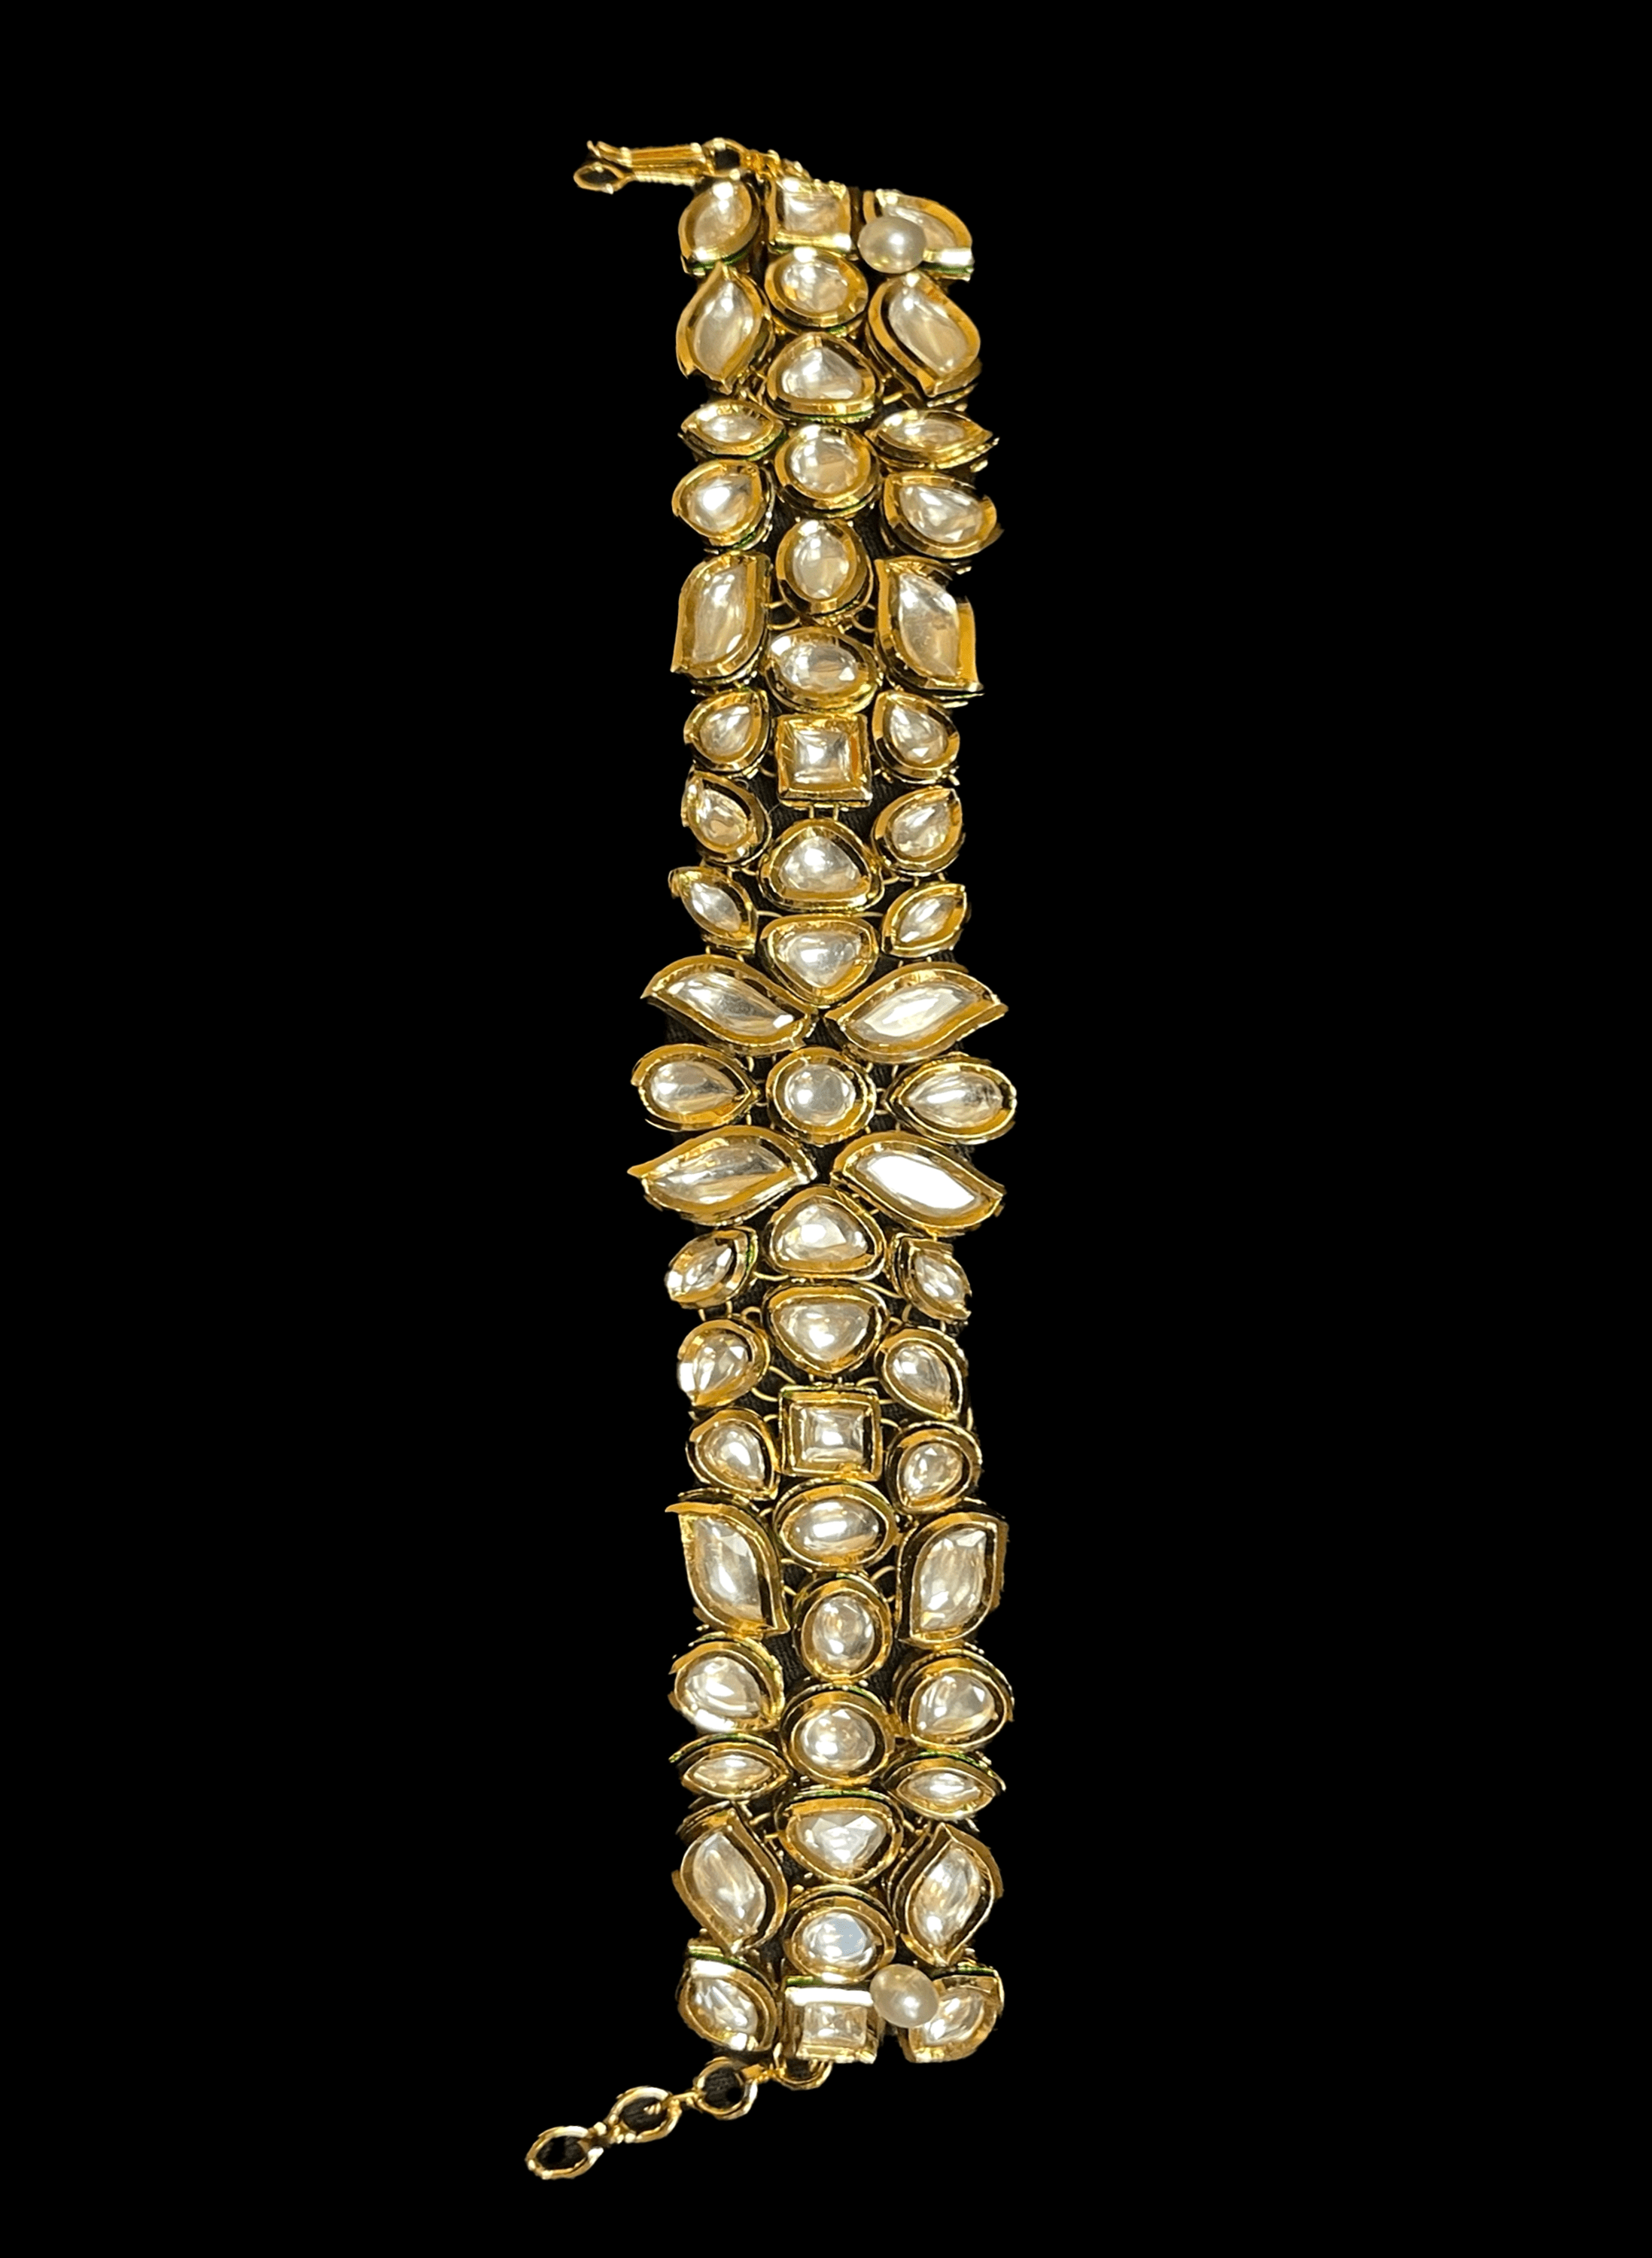 Gold-plated Kundan cuff bracelet for Indian brides